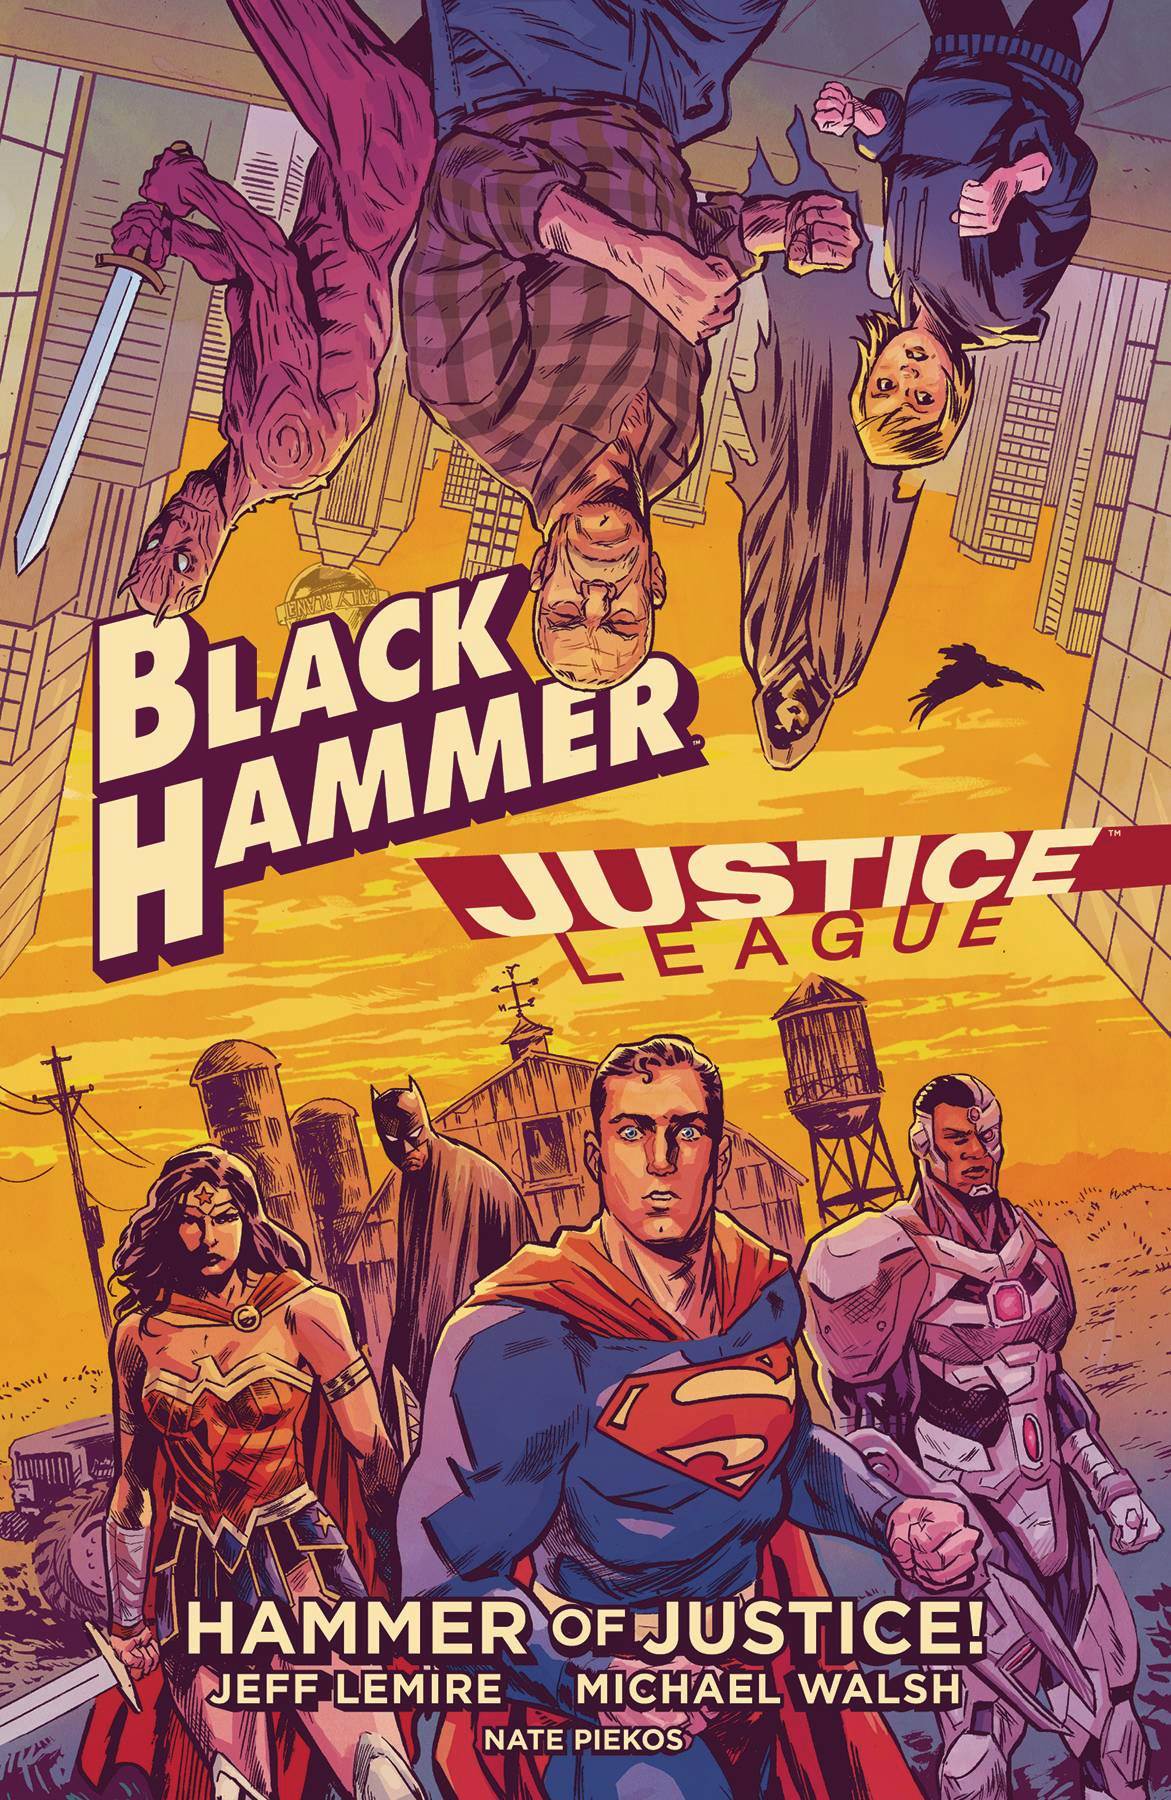 Black Hammer / Justice League: Hammer of Justice! (2019) HC